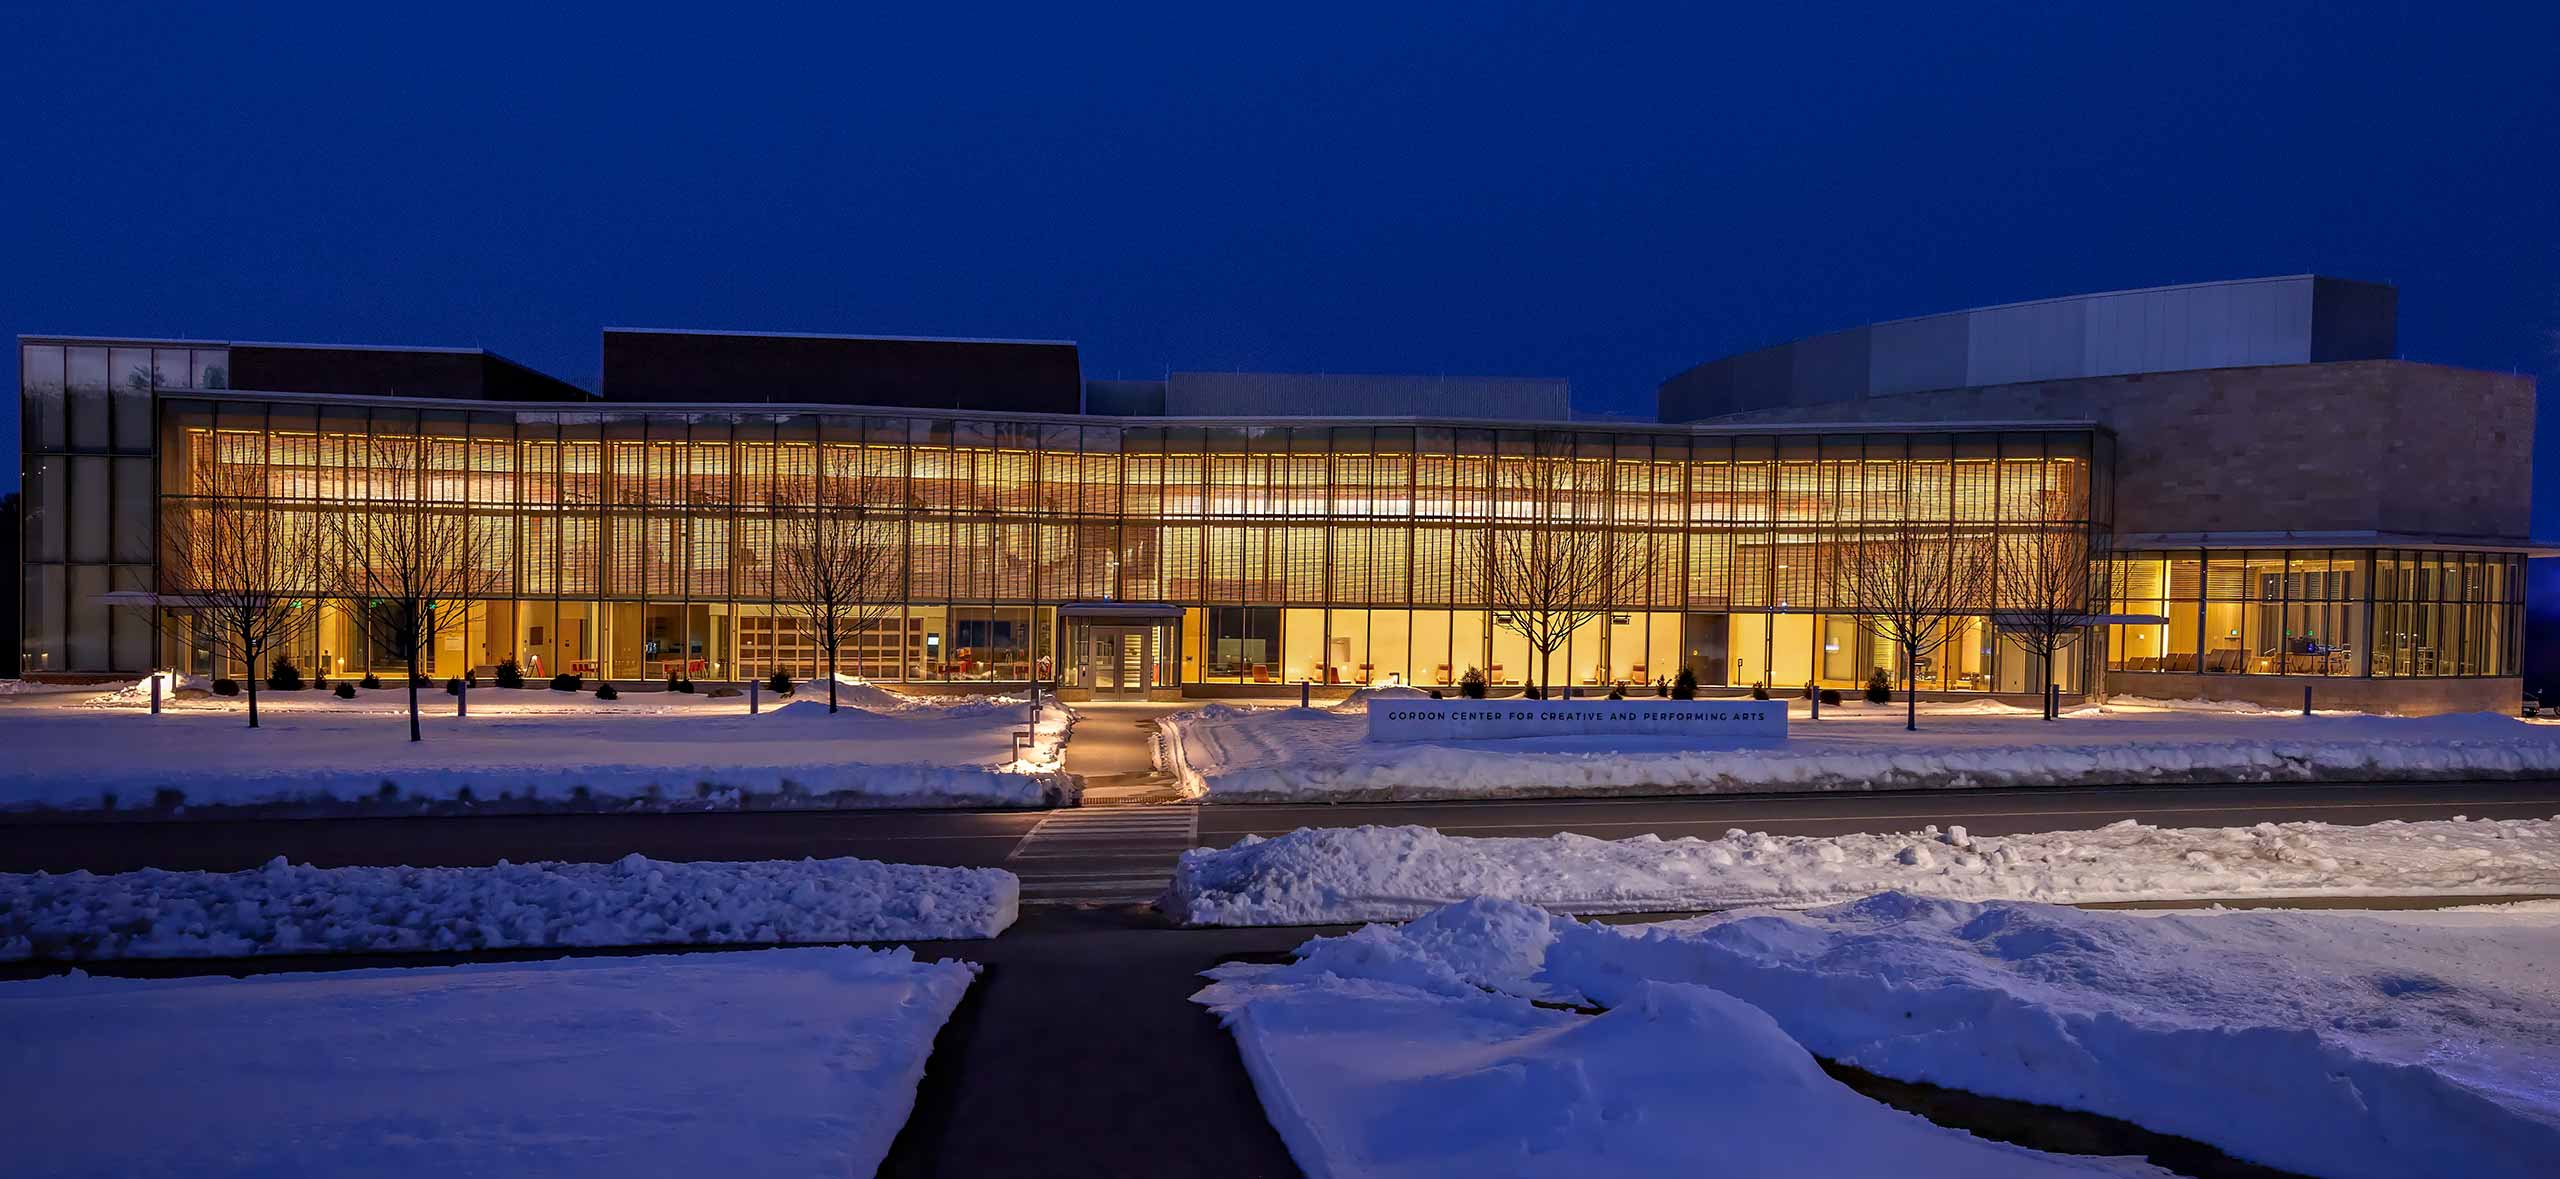 Gordon Center for Creative and Performing Arts